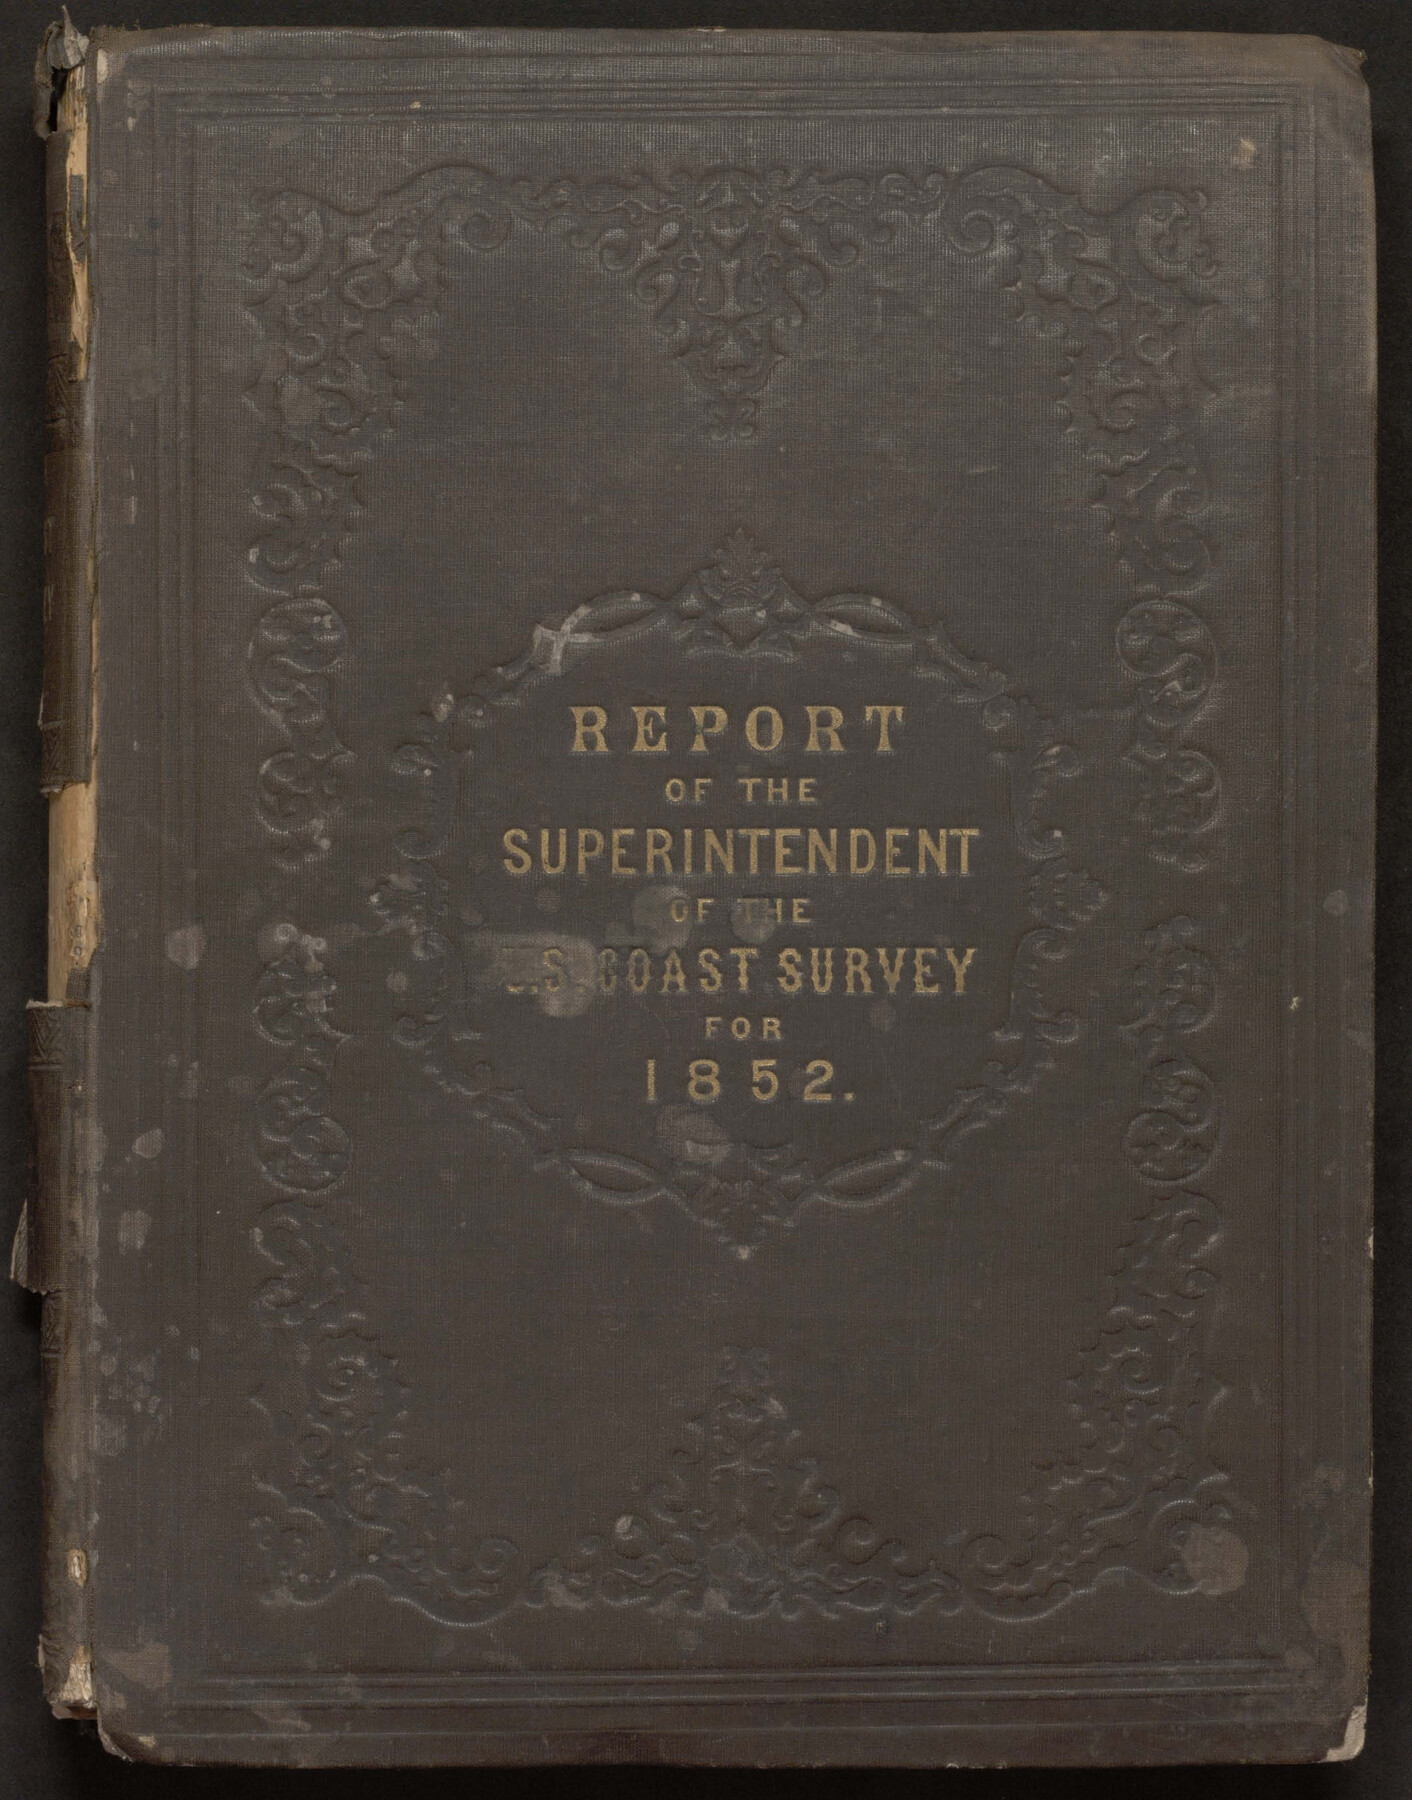 81738, Report of the Superintendent of the Coast Survey Showing the Progress of the Survey in the year 1852